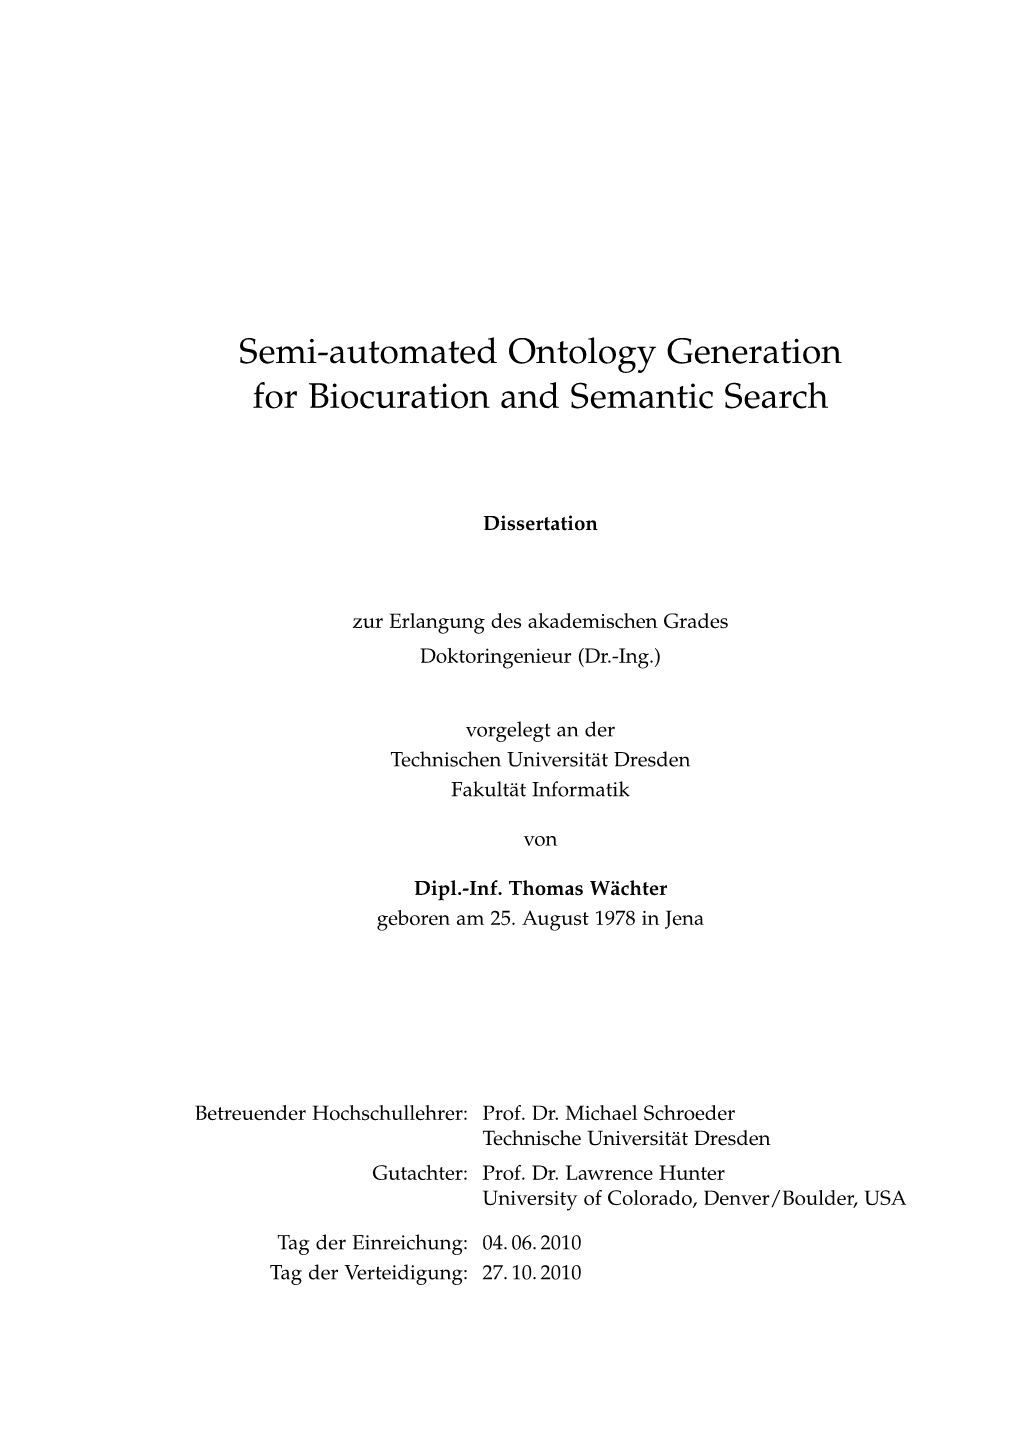 Semi-Automated Ontology Generation for Biocuration and Semantic Search